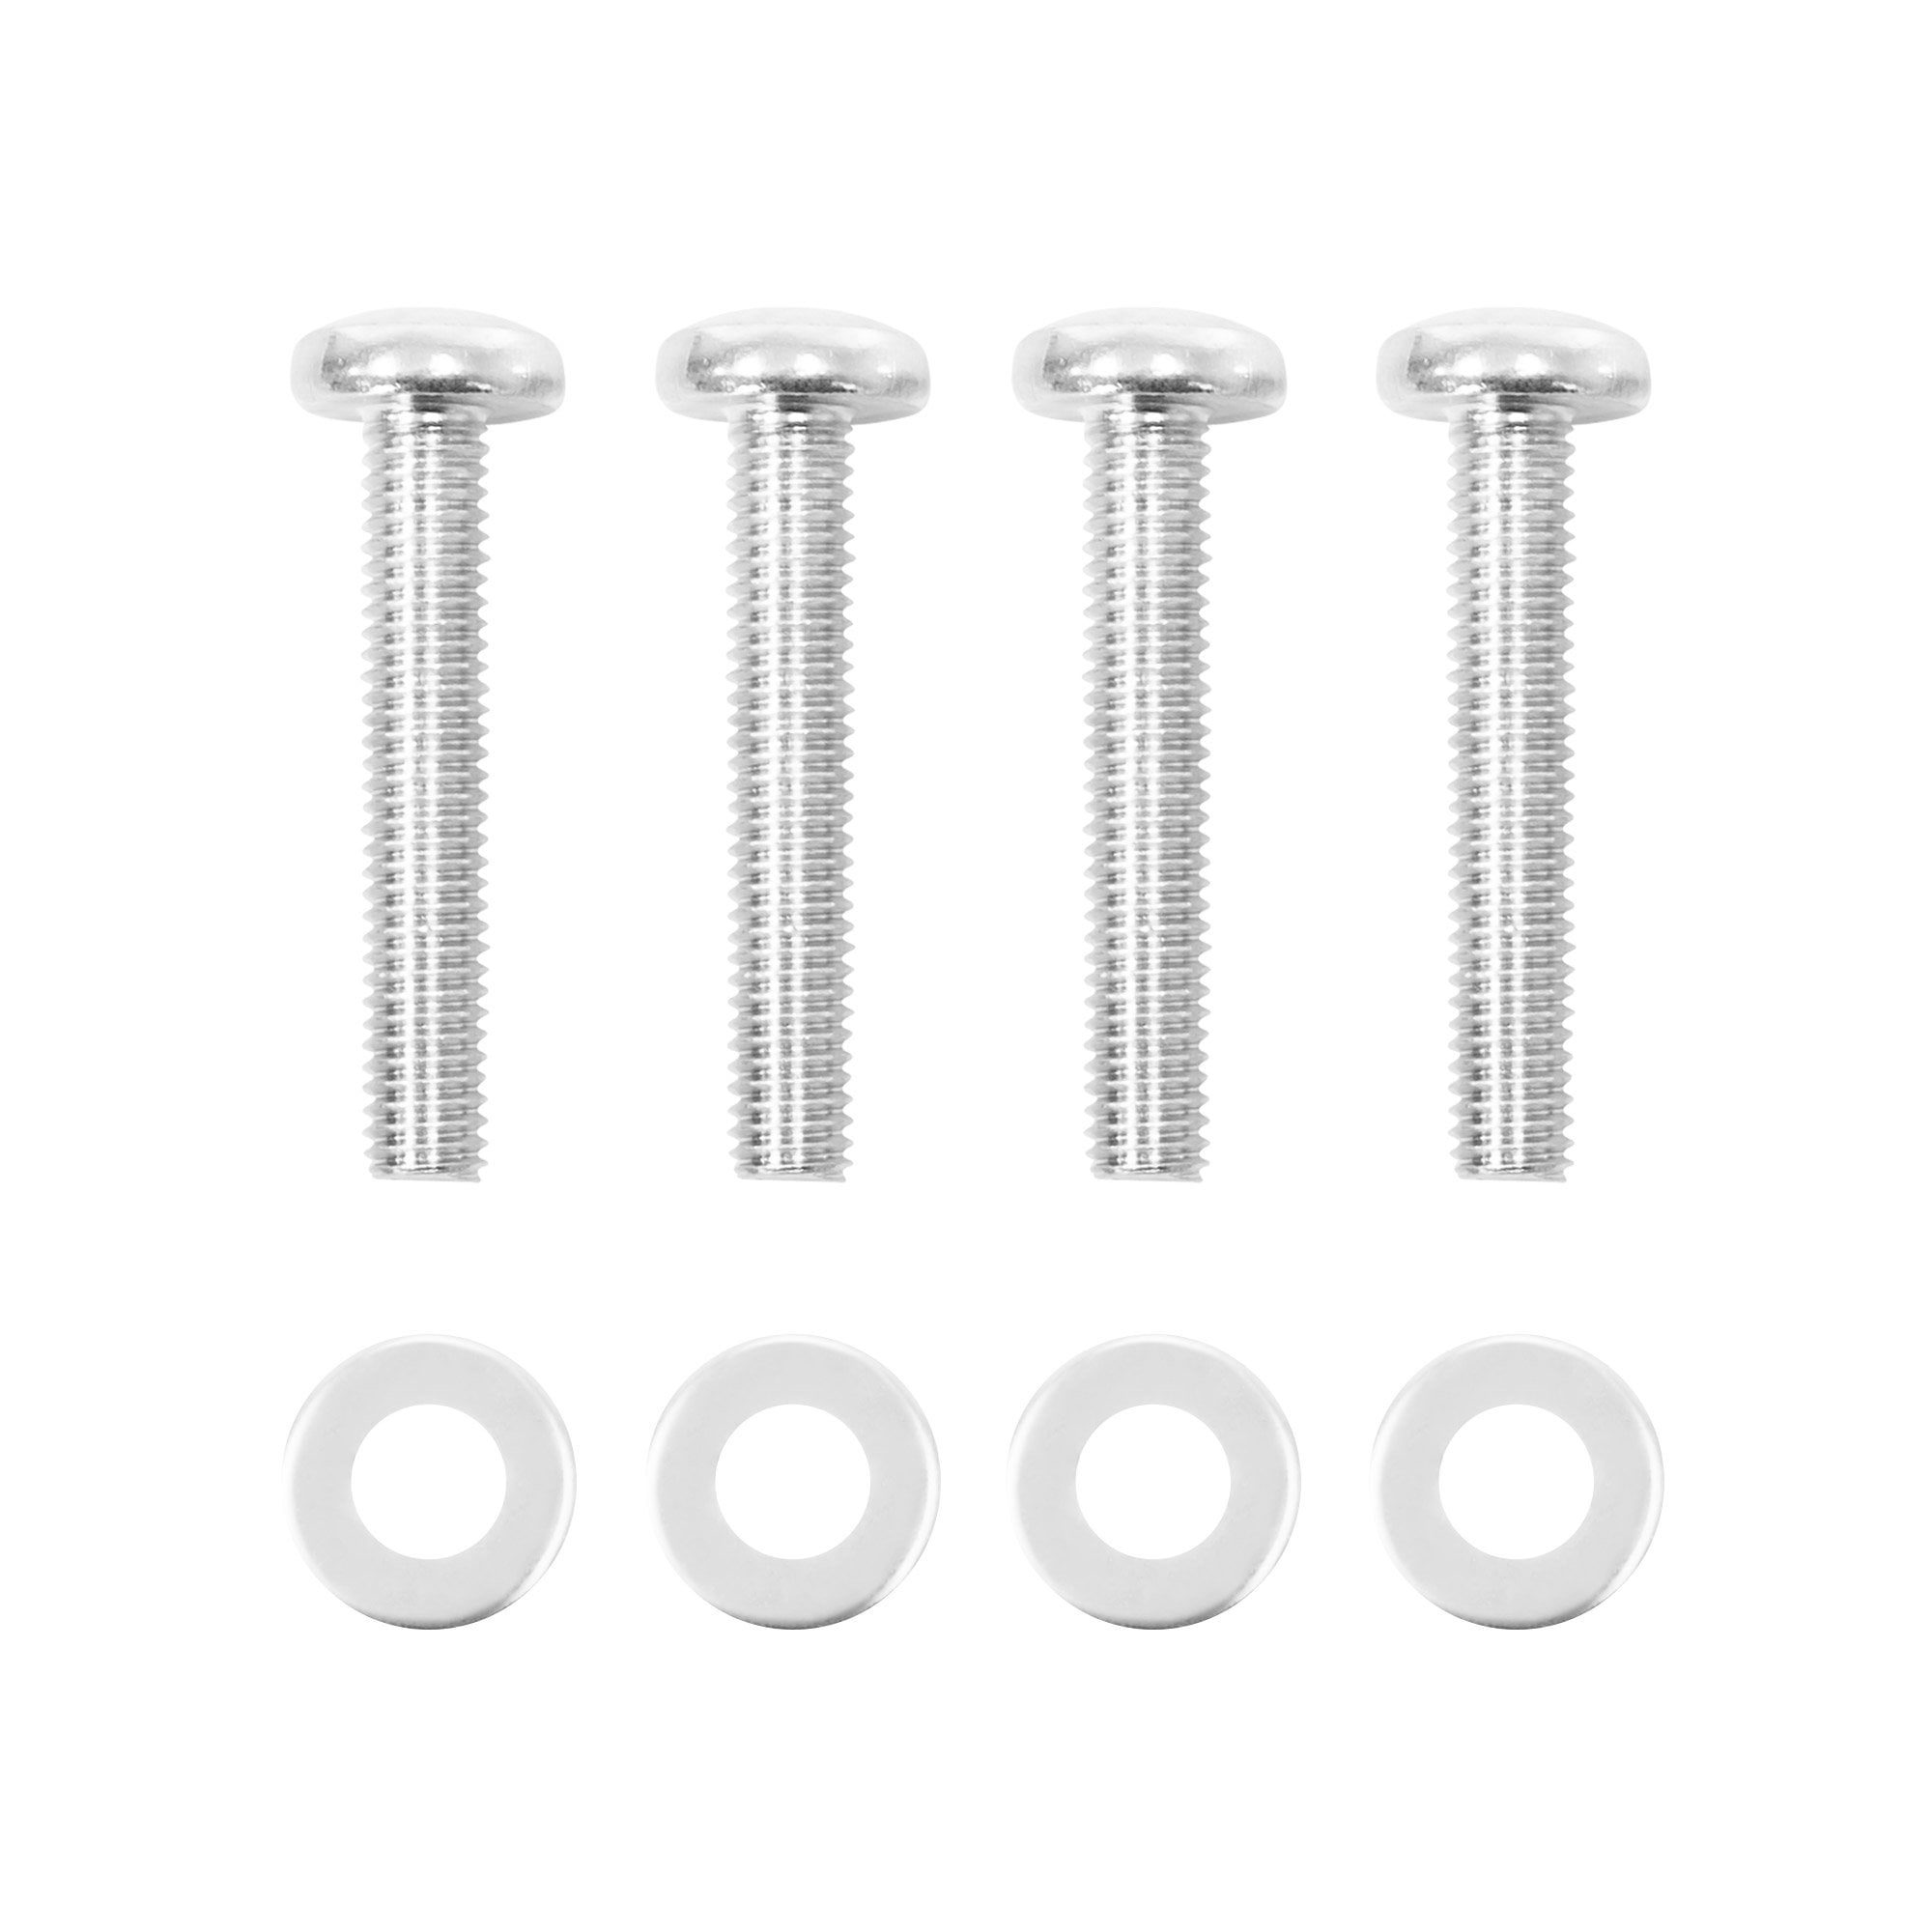 ReplacementScrews Stand Screws for Samsung LN46B650T1F